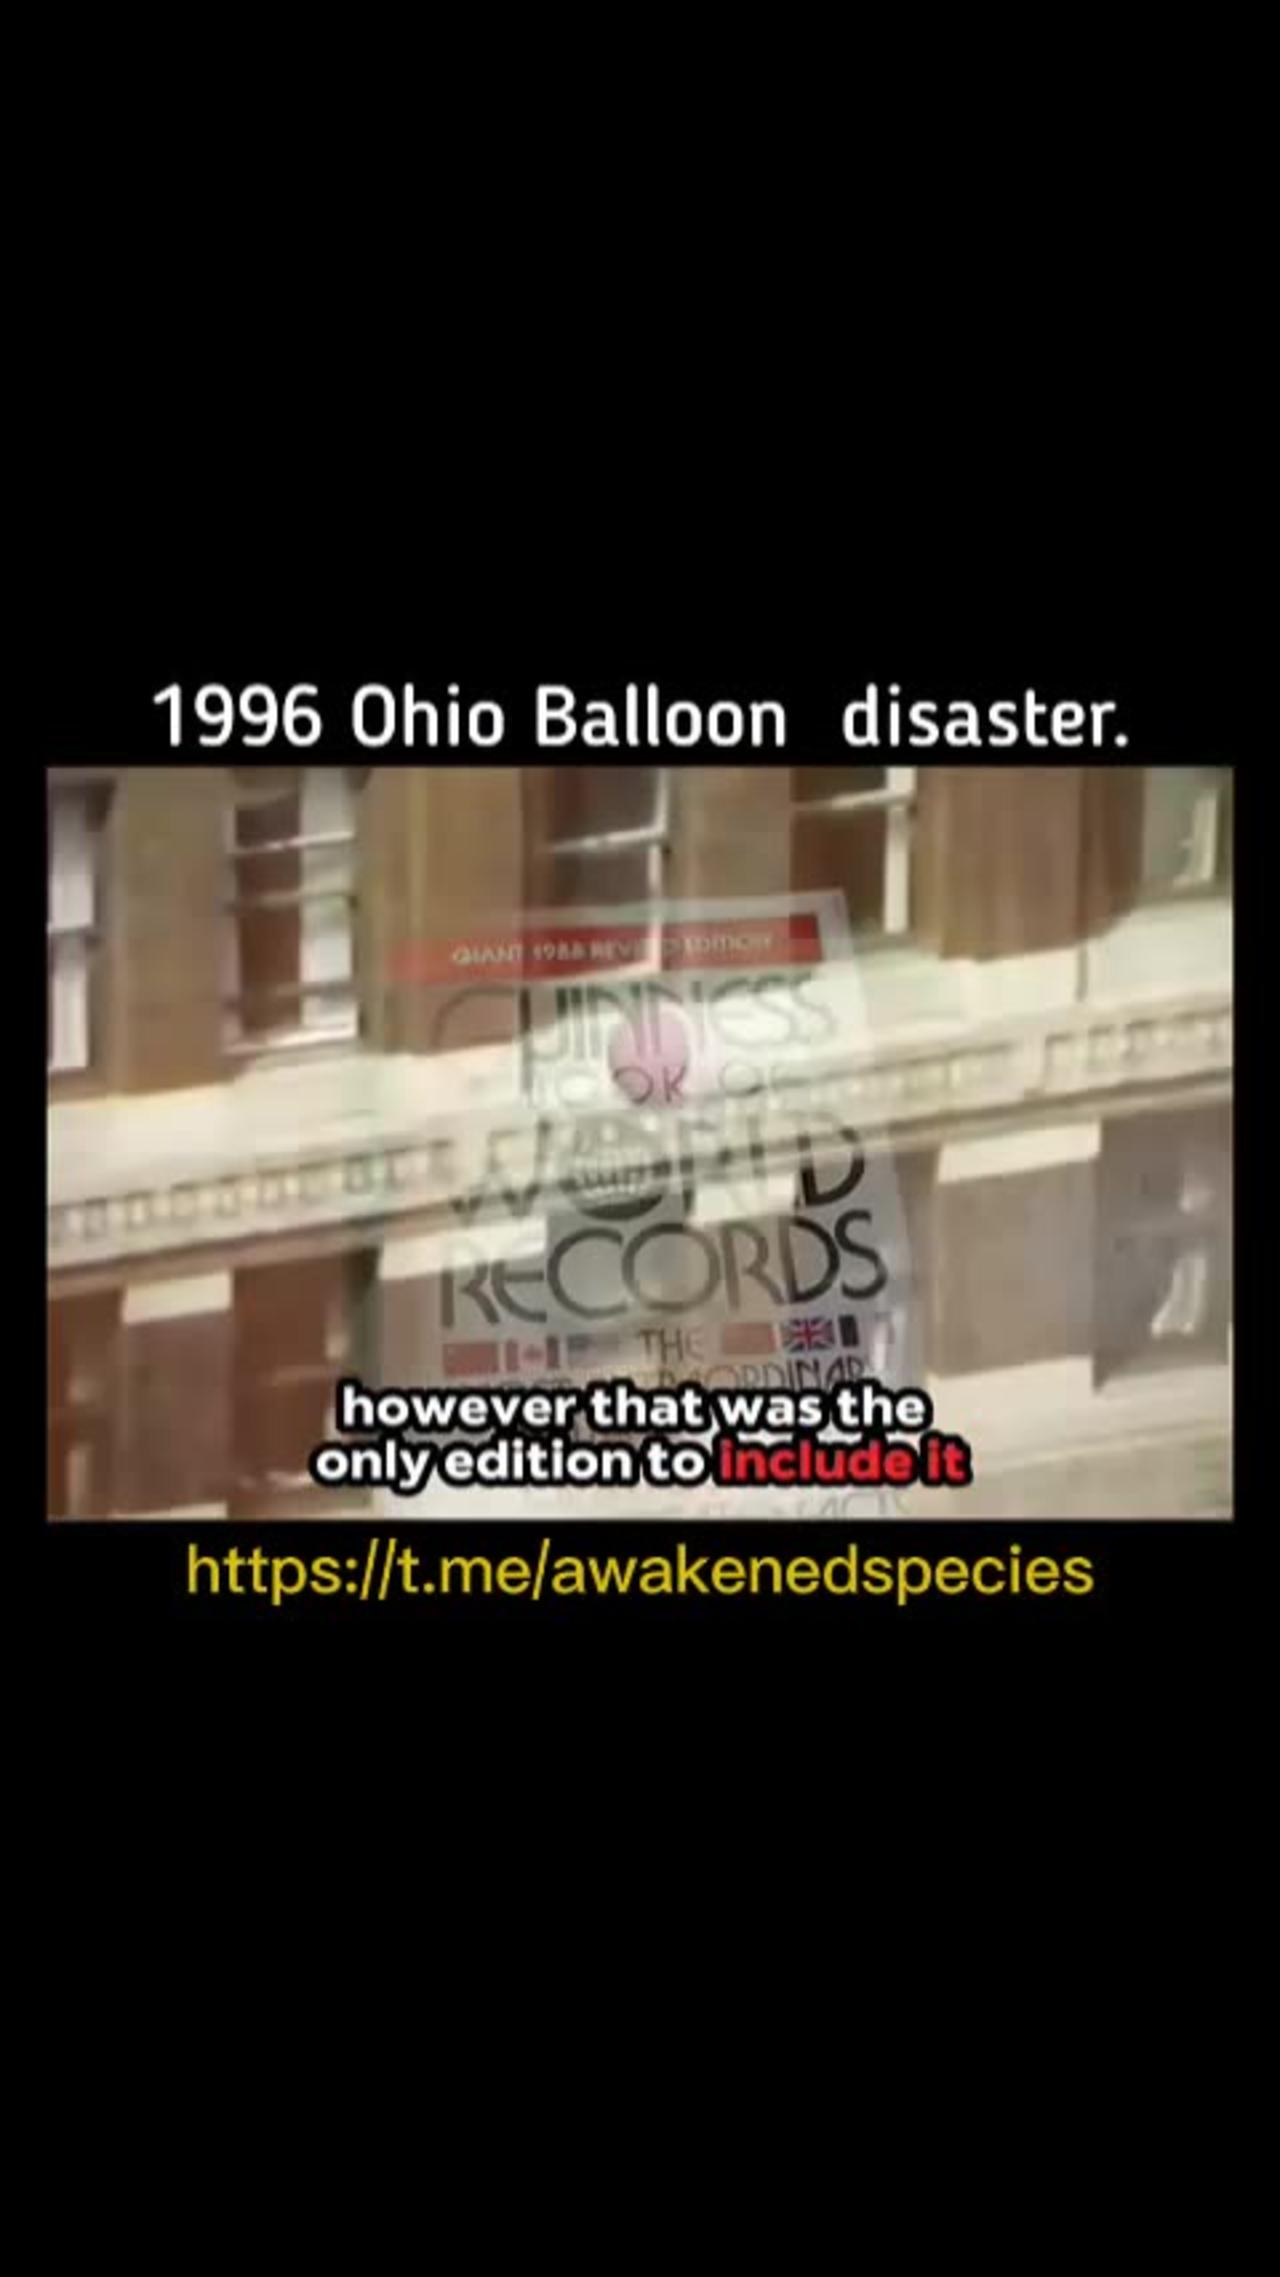 Cleveland, Ohio, organizers attempted to break the world record for baloons